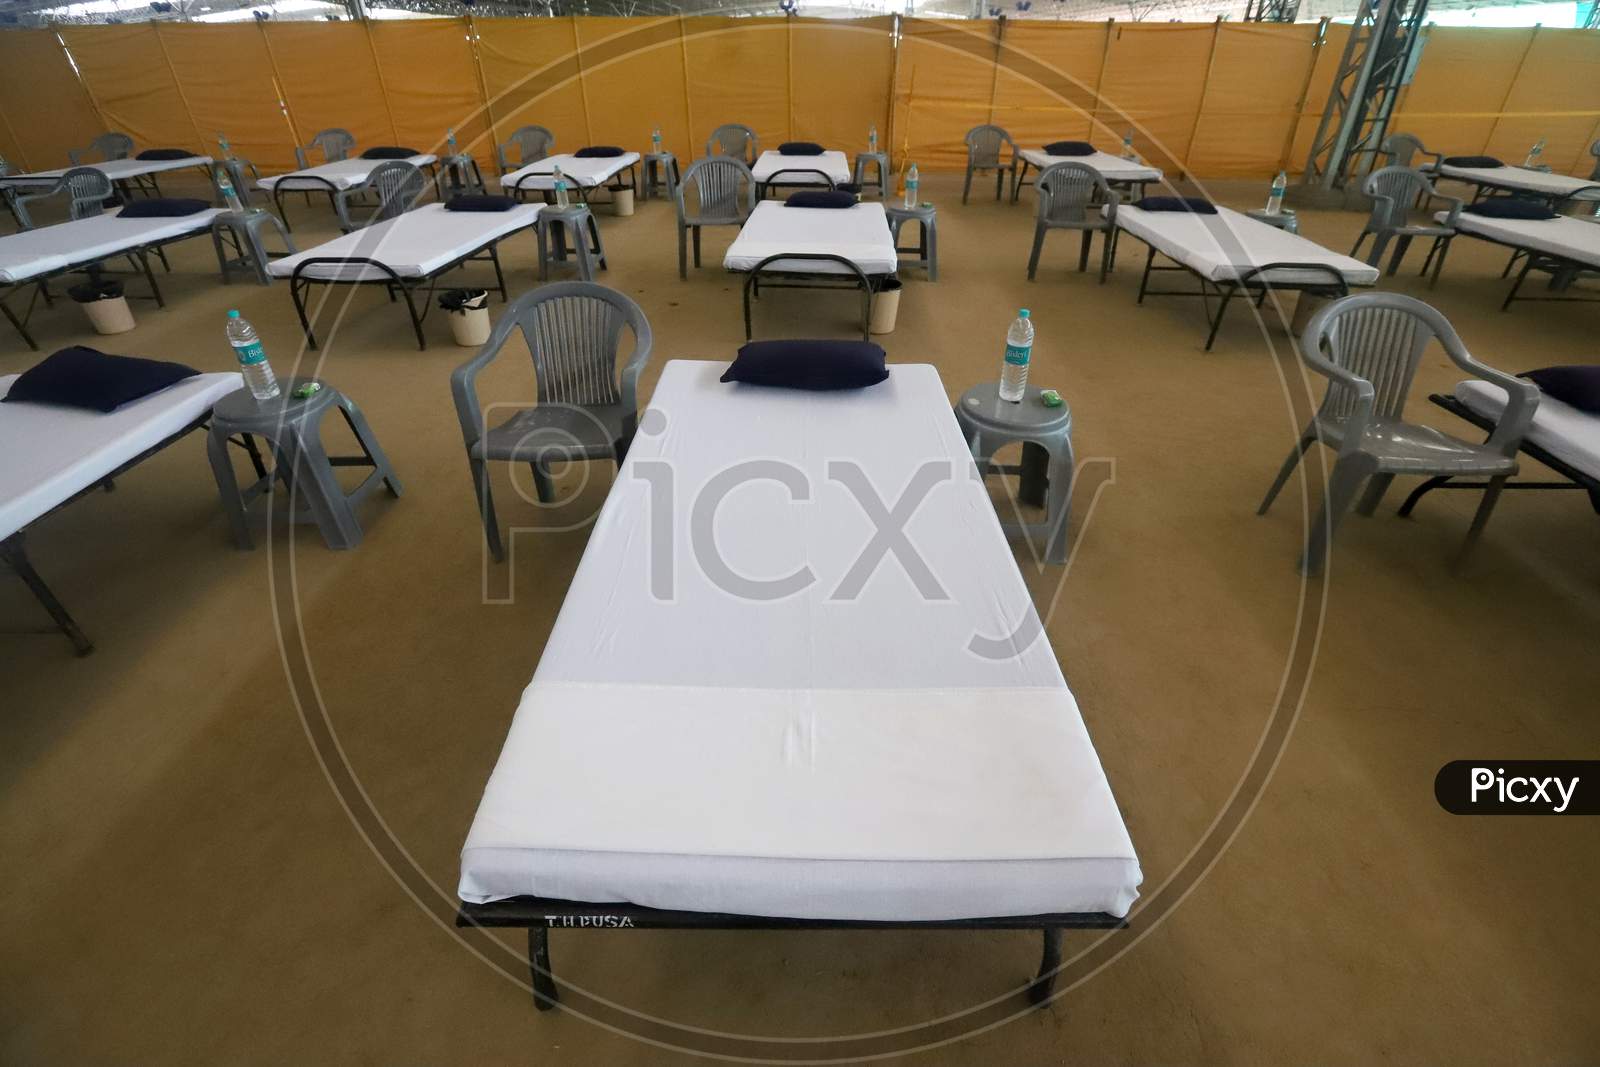 New Beds Setup Inside The Radha Soami Spiritual Centre Converted To A Quarantine Facility For Covid-19 Patients In New Delhi, On June 20, 2020